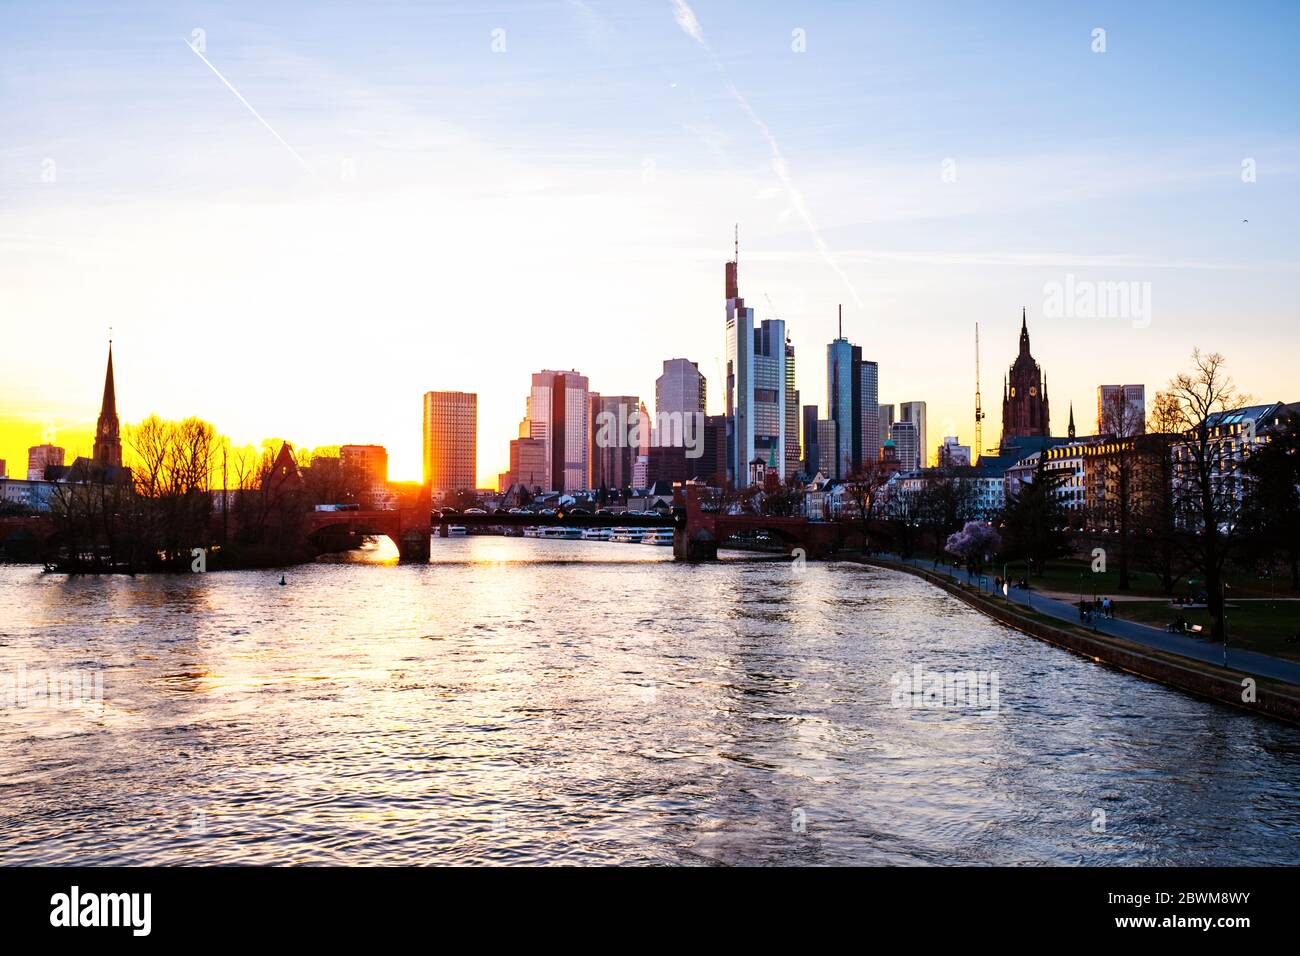 Frankfurt am Main, Germany. Skyline of Frankfurt, Germany in the sunset with famous skyscrapers and river at twilight with sun behind the skyscrapers Stock Photo